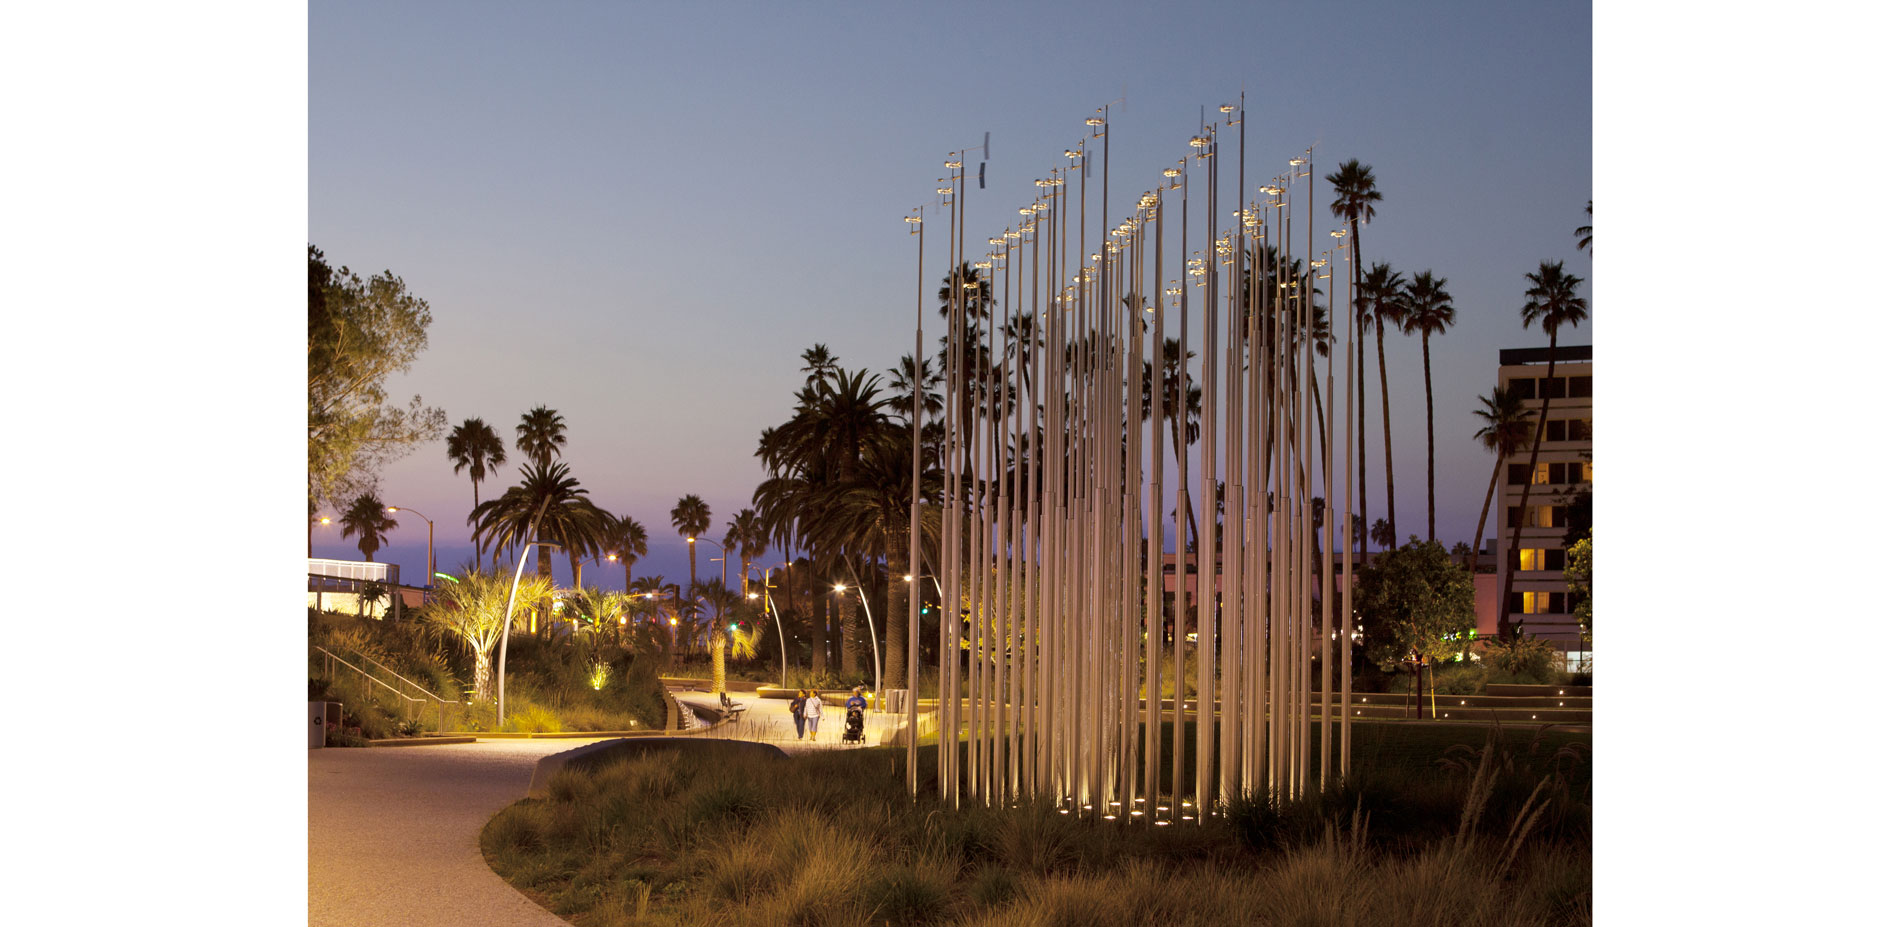 Artist Iñigo Manglano-Ovalle’s centrally situated “Weather Field”, is a grid of 49 telescoping stainless steel poles, each approximately twenty feet h…